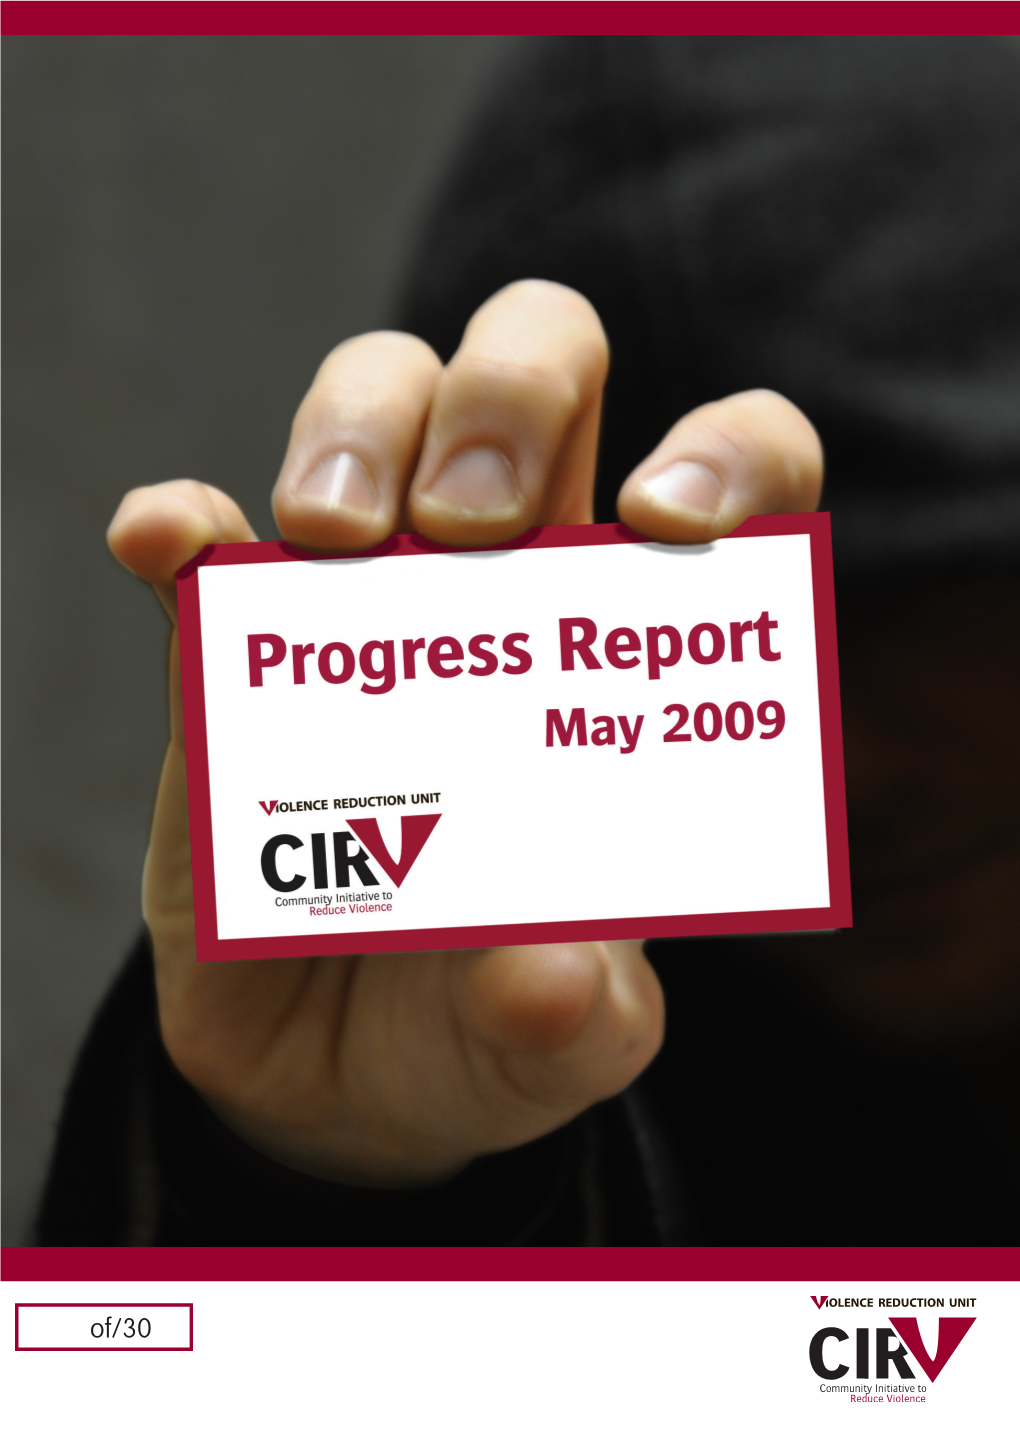 CIRV’S First Self Referral Session on 24Th October 2008